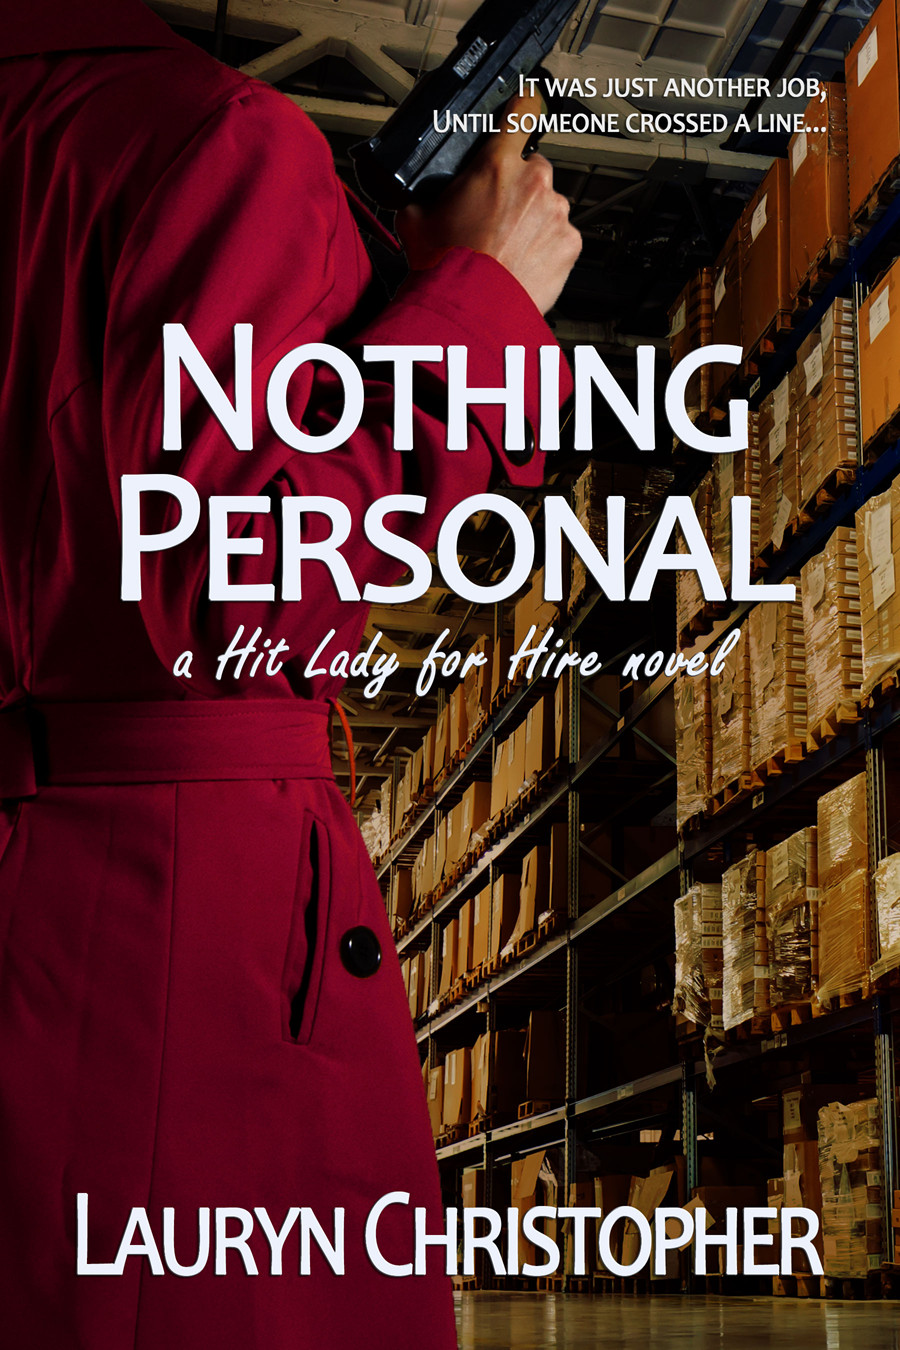 Nothing Personal, a novel by Lauryn Christopher